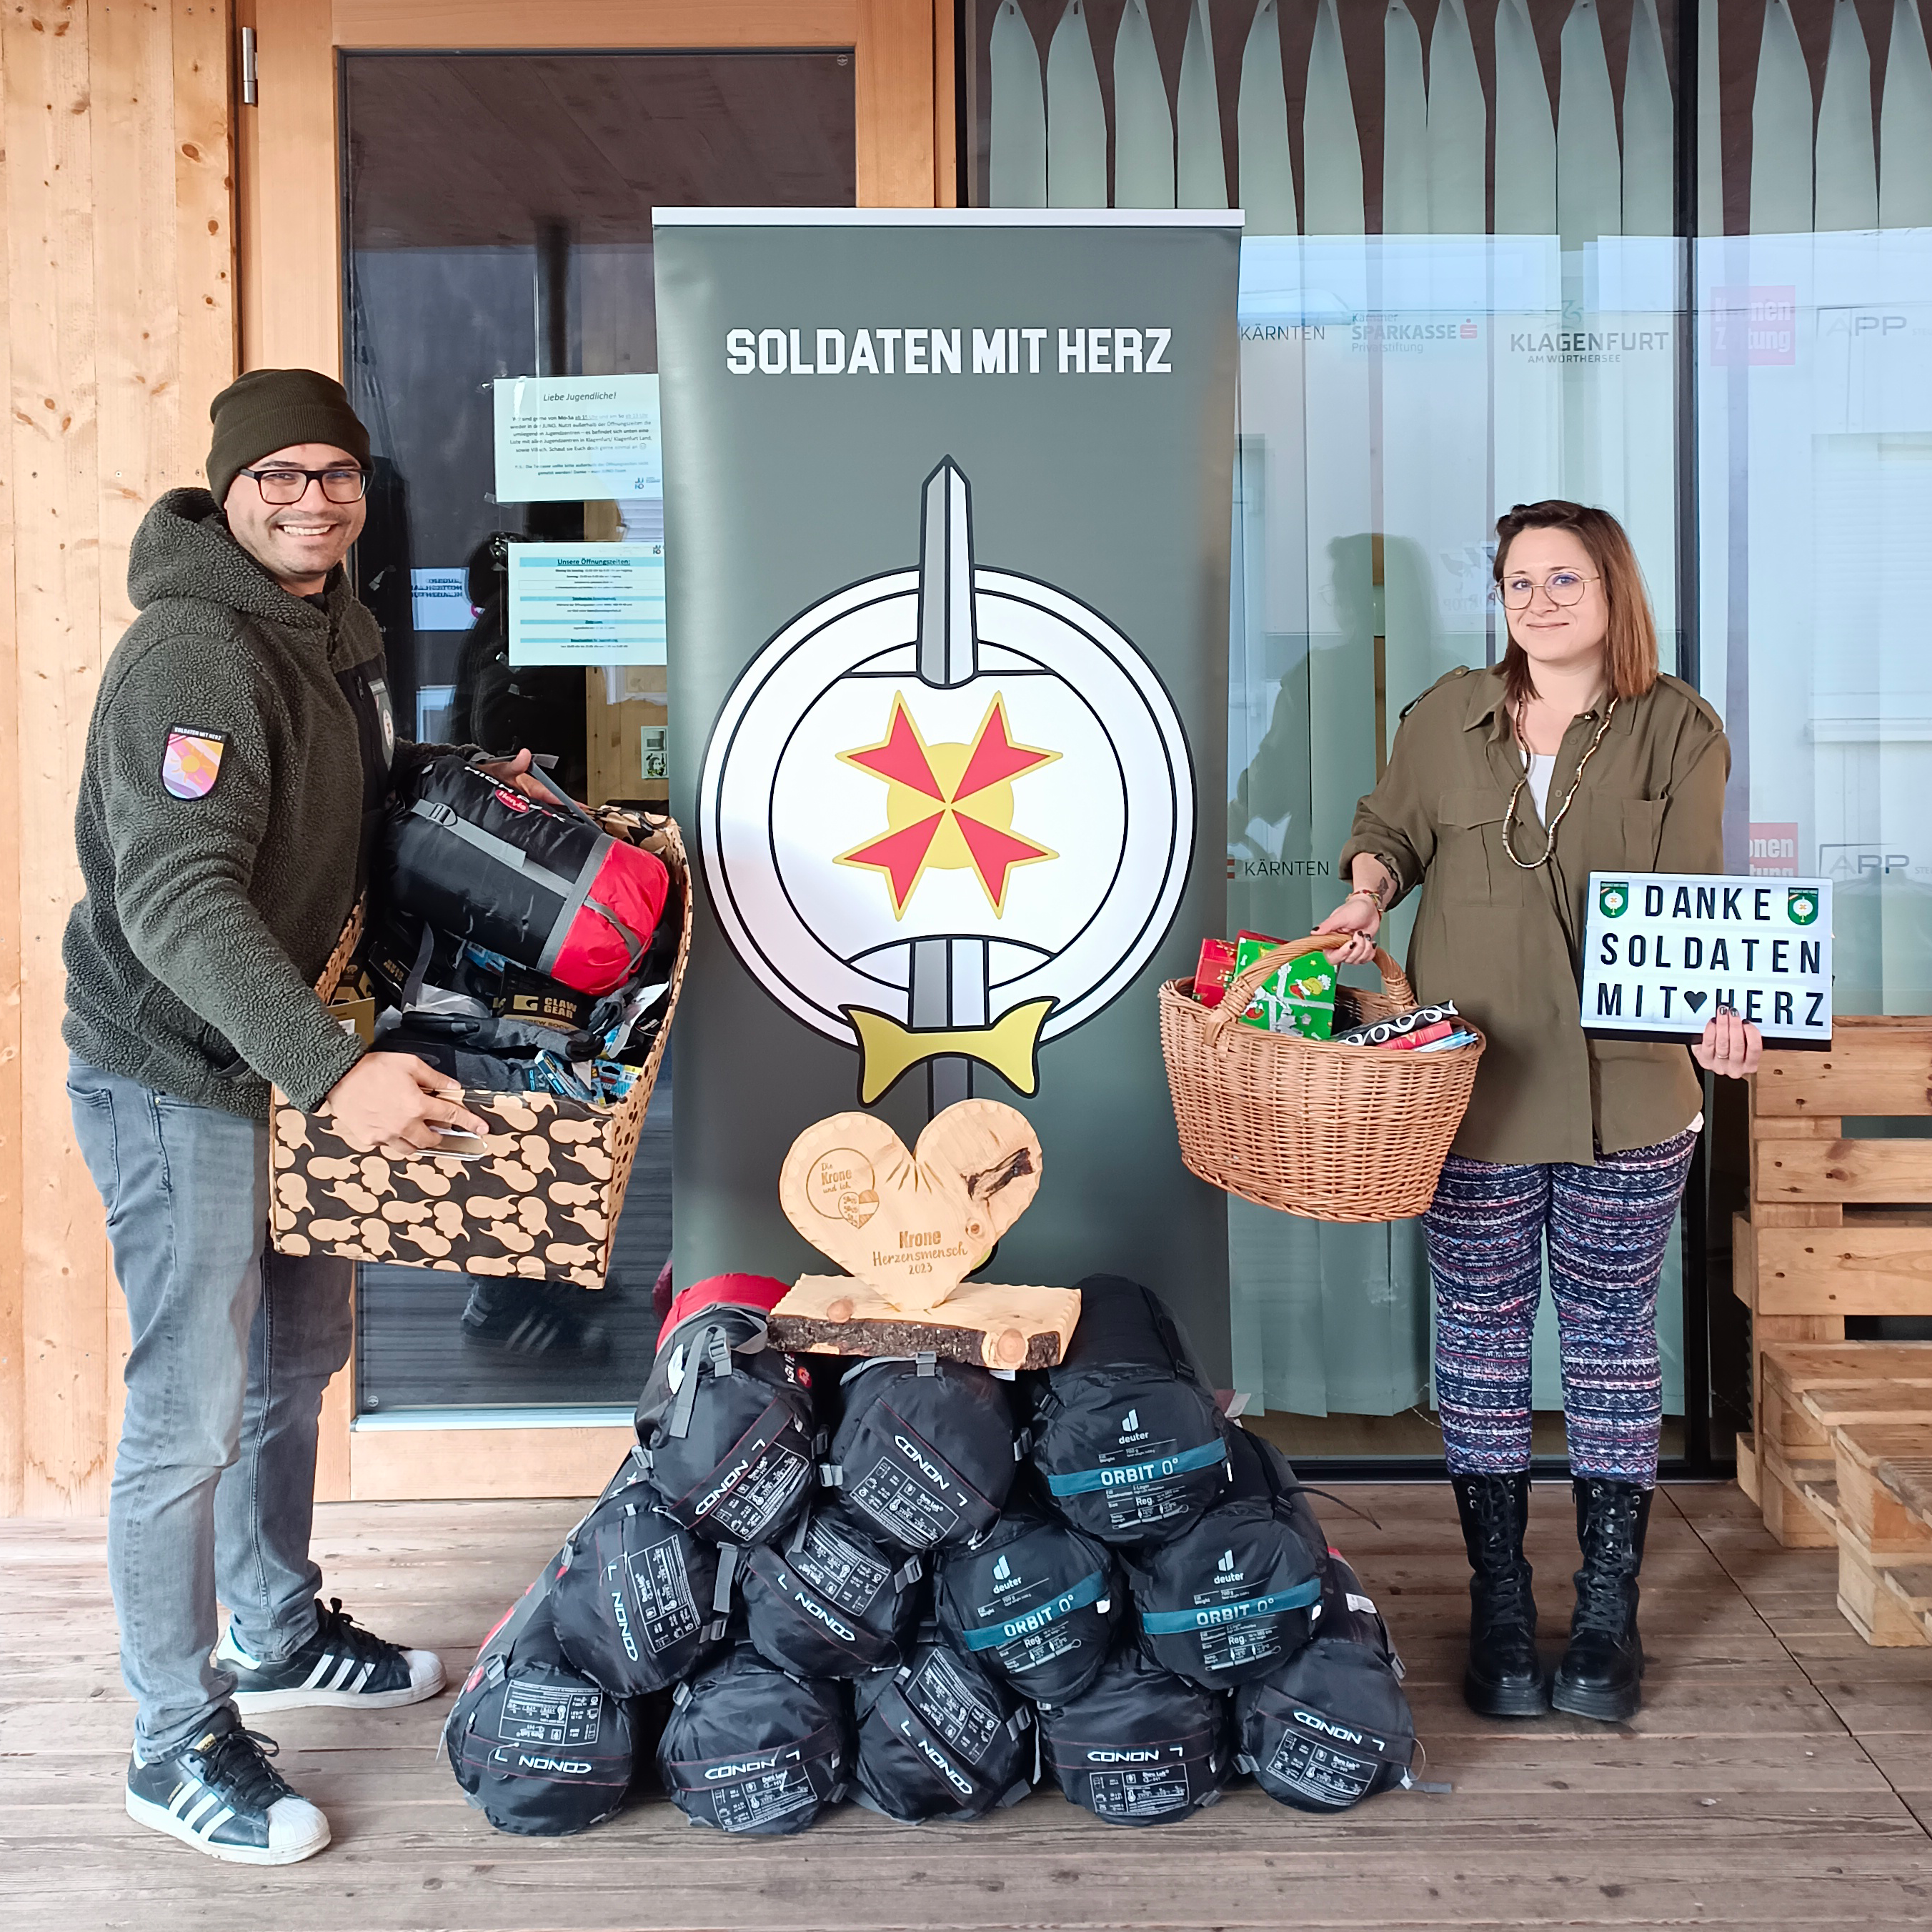 SOLDIERS WITH HEART: DELIVERY OF DONATIONS IN KIND